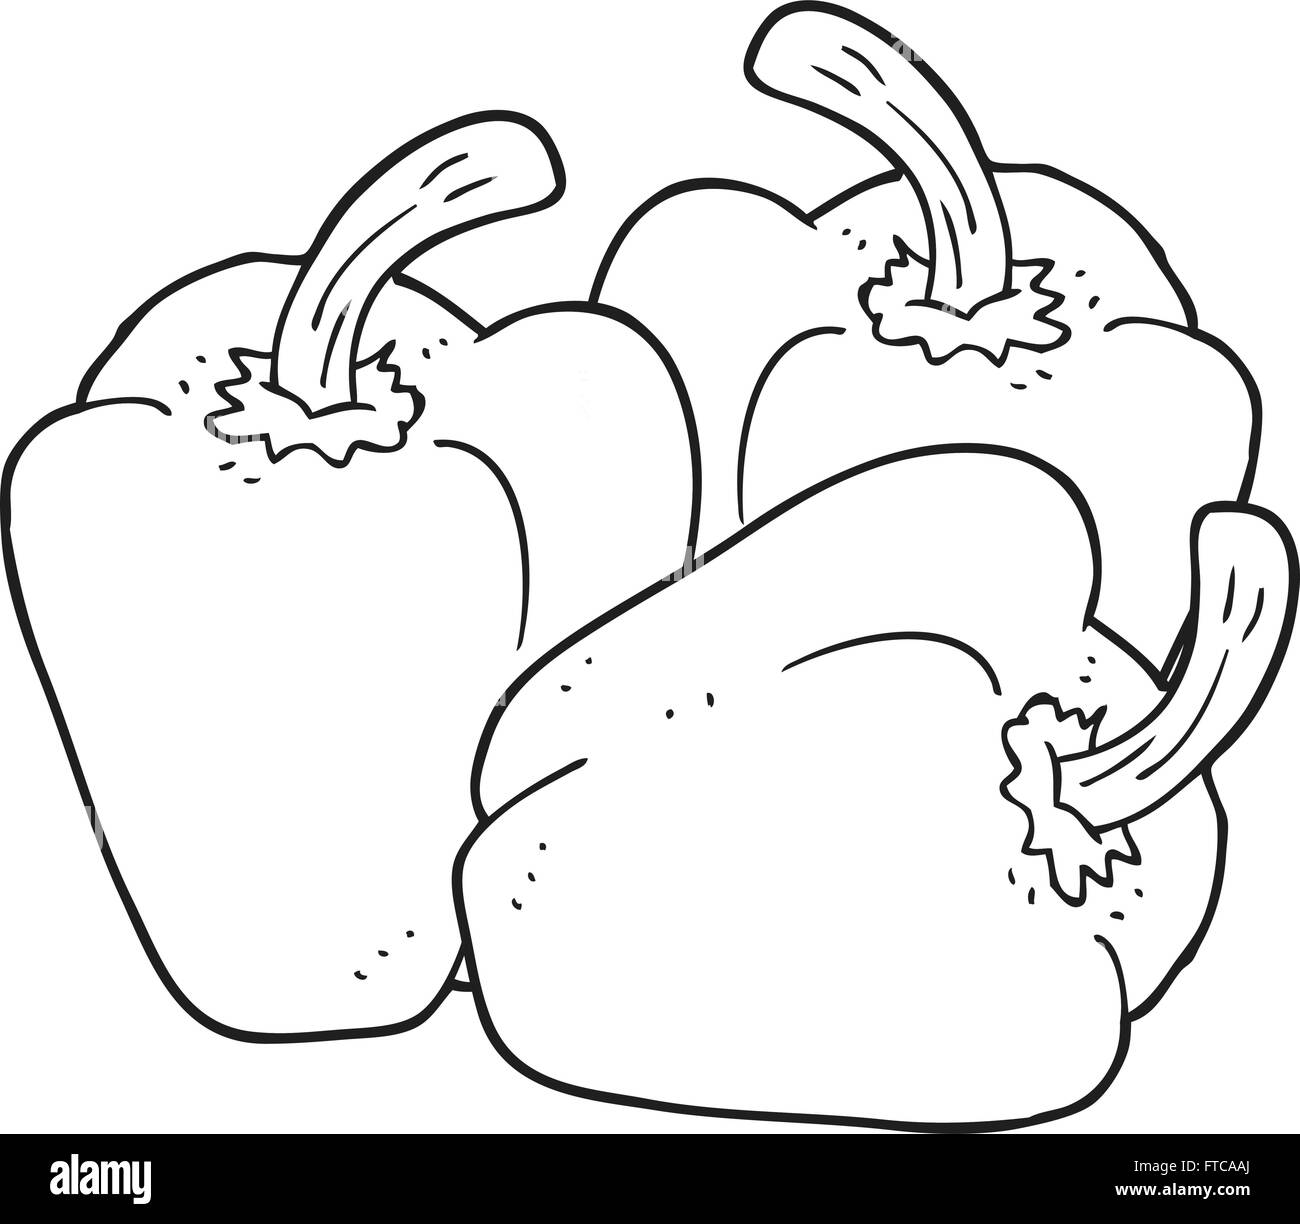 freehand drawn black and white cartoon peppers Stock Vector